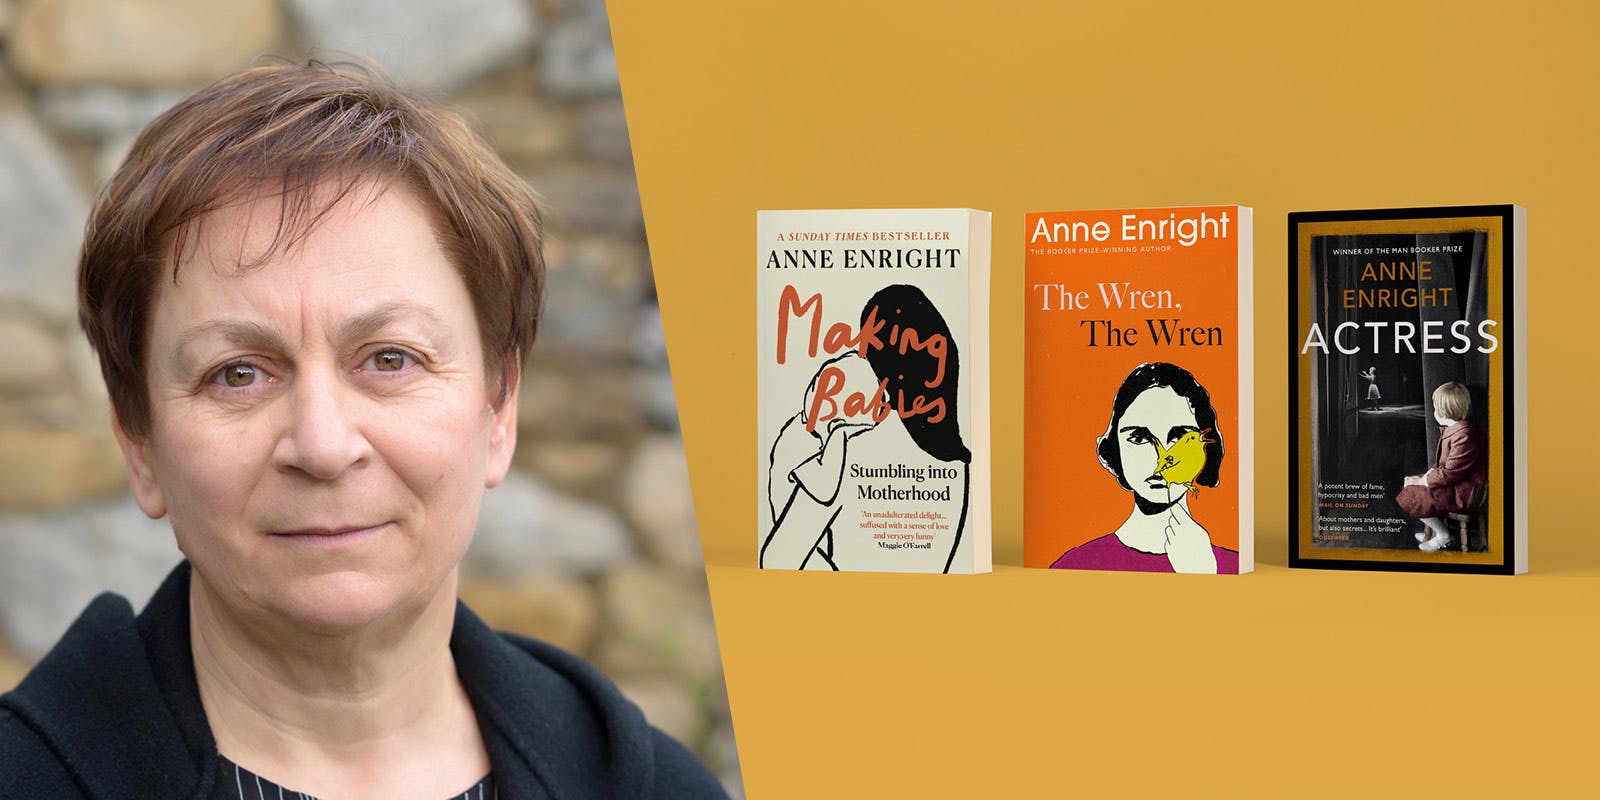 A useful guide to Anne Enright